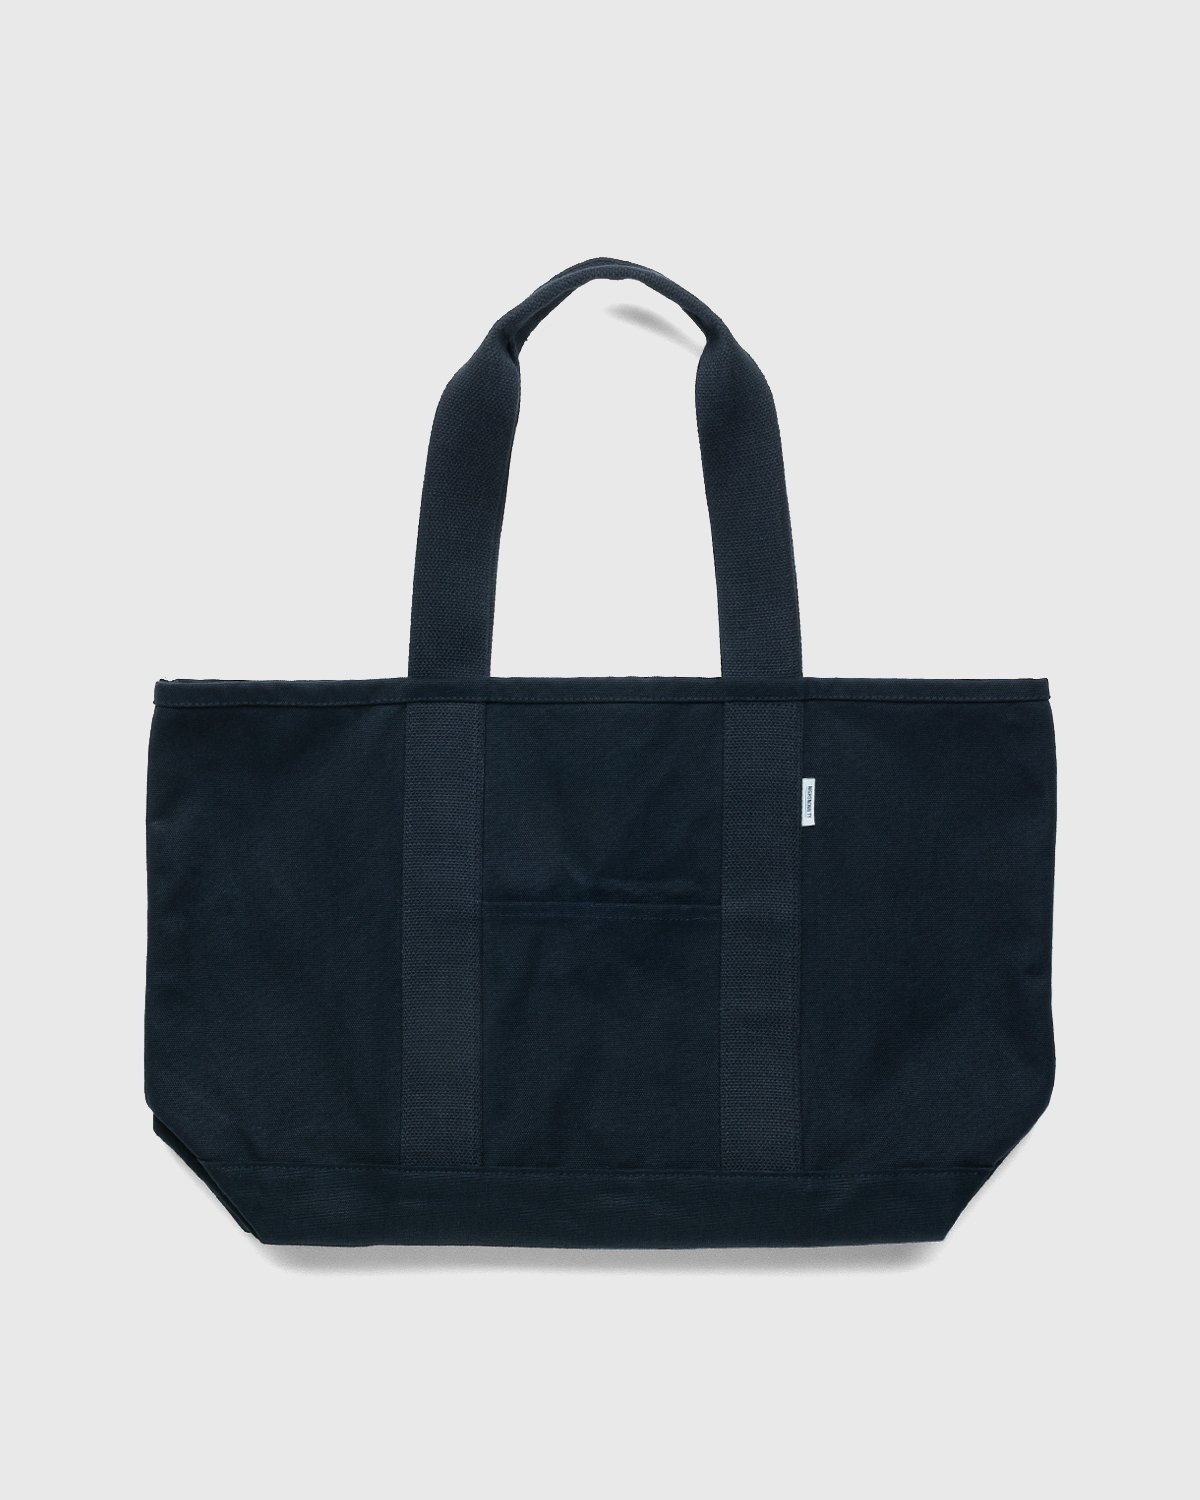 Highsnobiety – Heavy Canvas Large Shopper Tote Black - Tote Bags - Black - Image 2